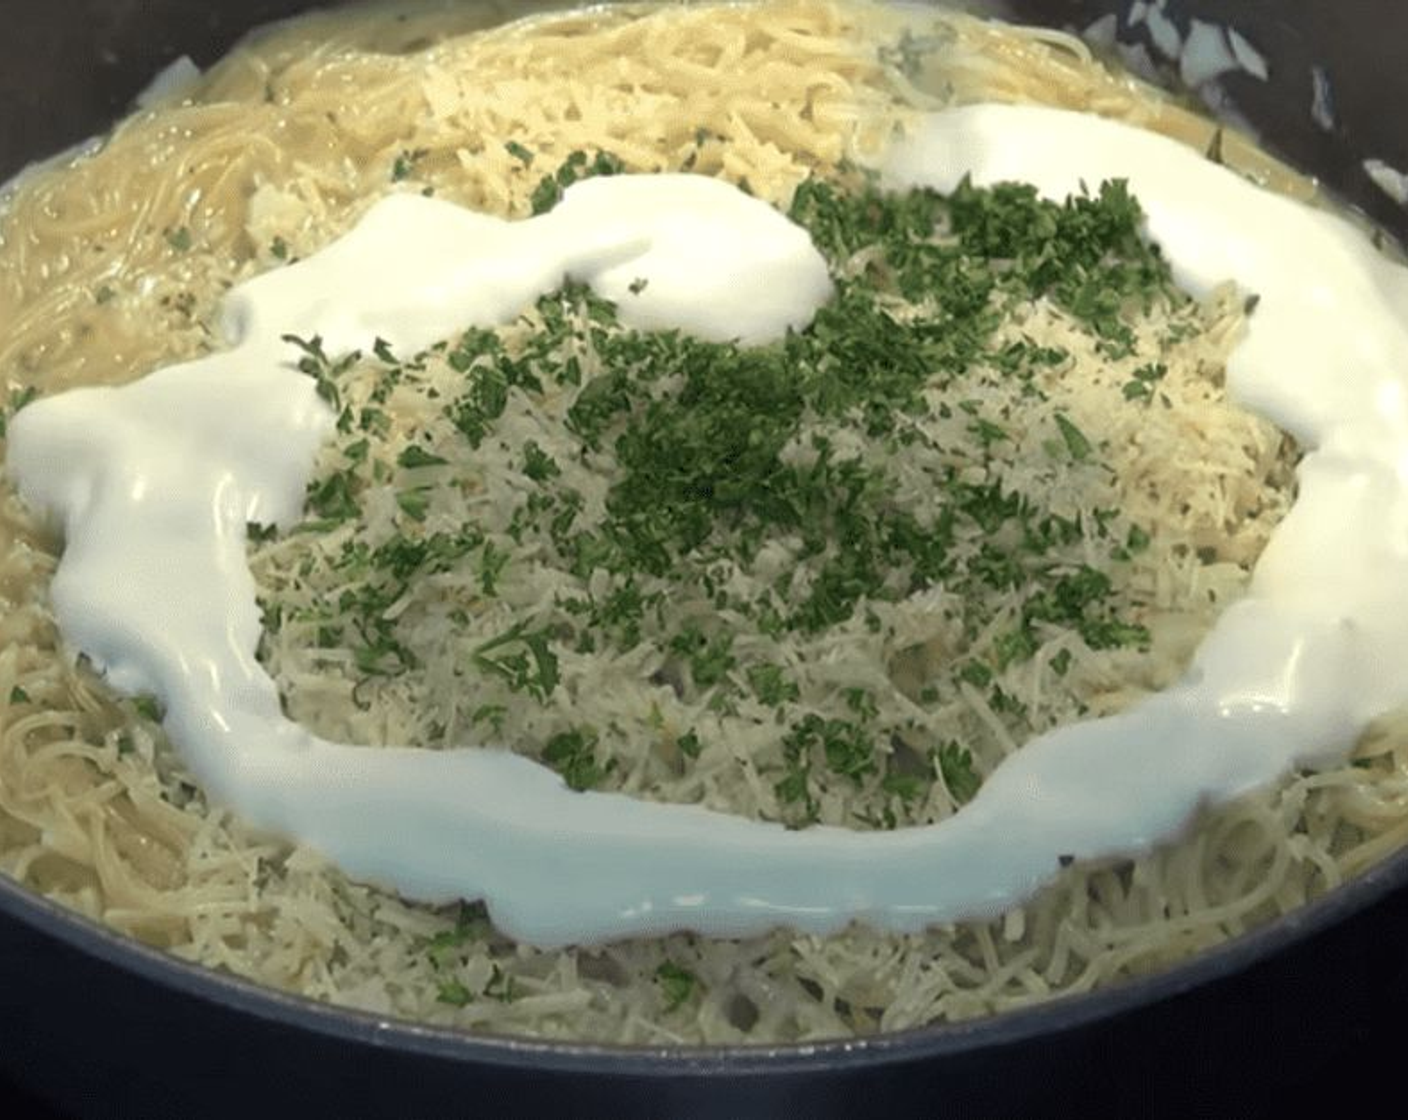 step 6 Add the Fresh Parsley (1 Tbsp), Grated Parmesan Cheese (1 cup) and Cream (3/4 cup) and stir through until the cheese has completely melted.